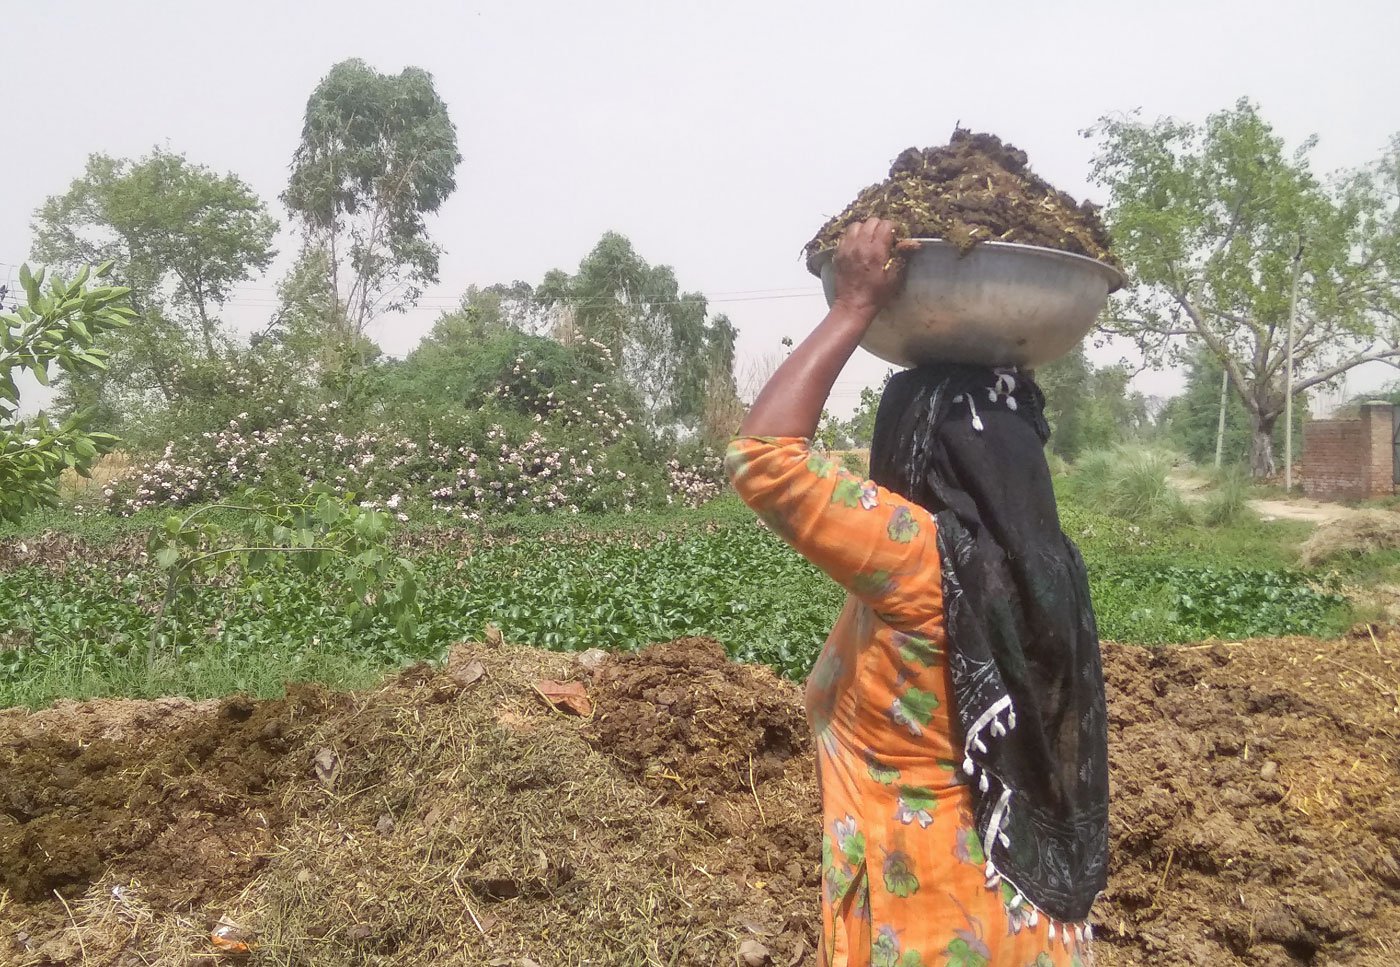 Helplessness and poverty pushes Mazhabi Sikh women like Manjit Kaur in Havelian to clean cattle sheds for low wages. Small loans from Jat Sikh houses are essential to manage household expenses, but the high interest rates trap them in a cycle of debt